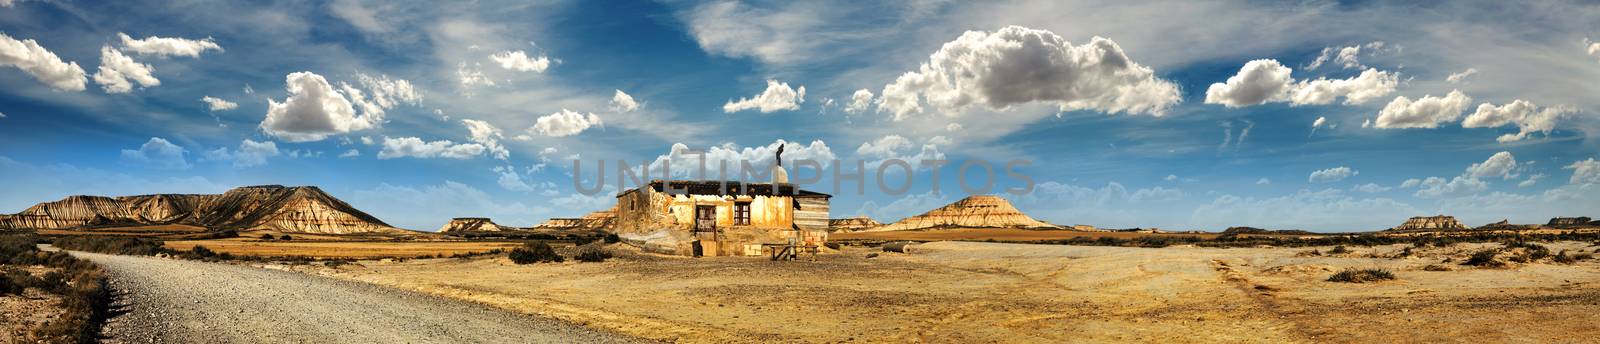 Little House on the Prairie panoramic image. Wild west stories